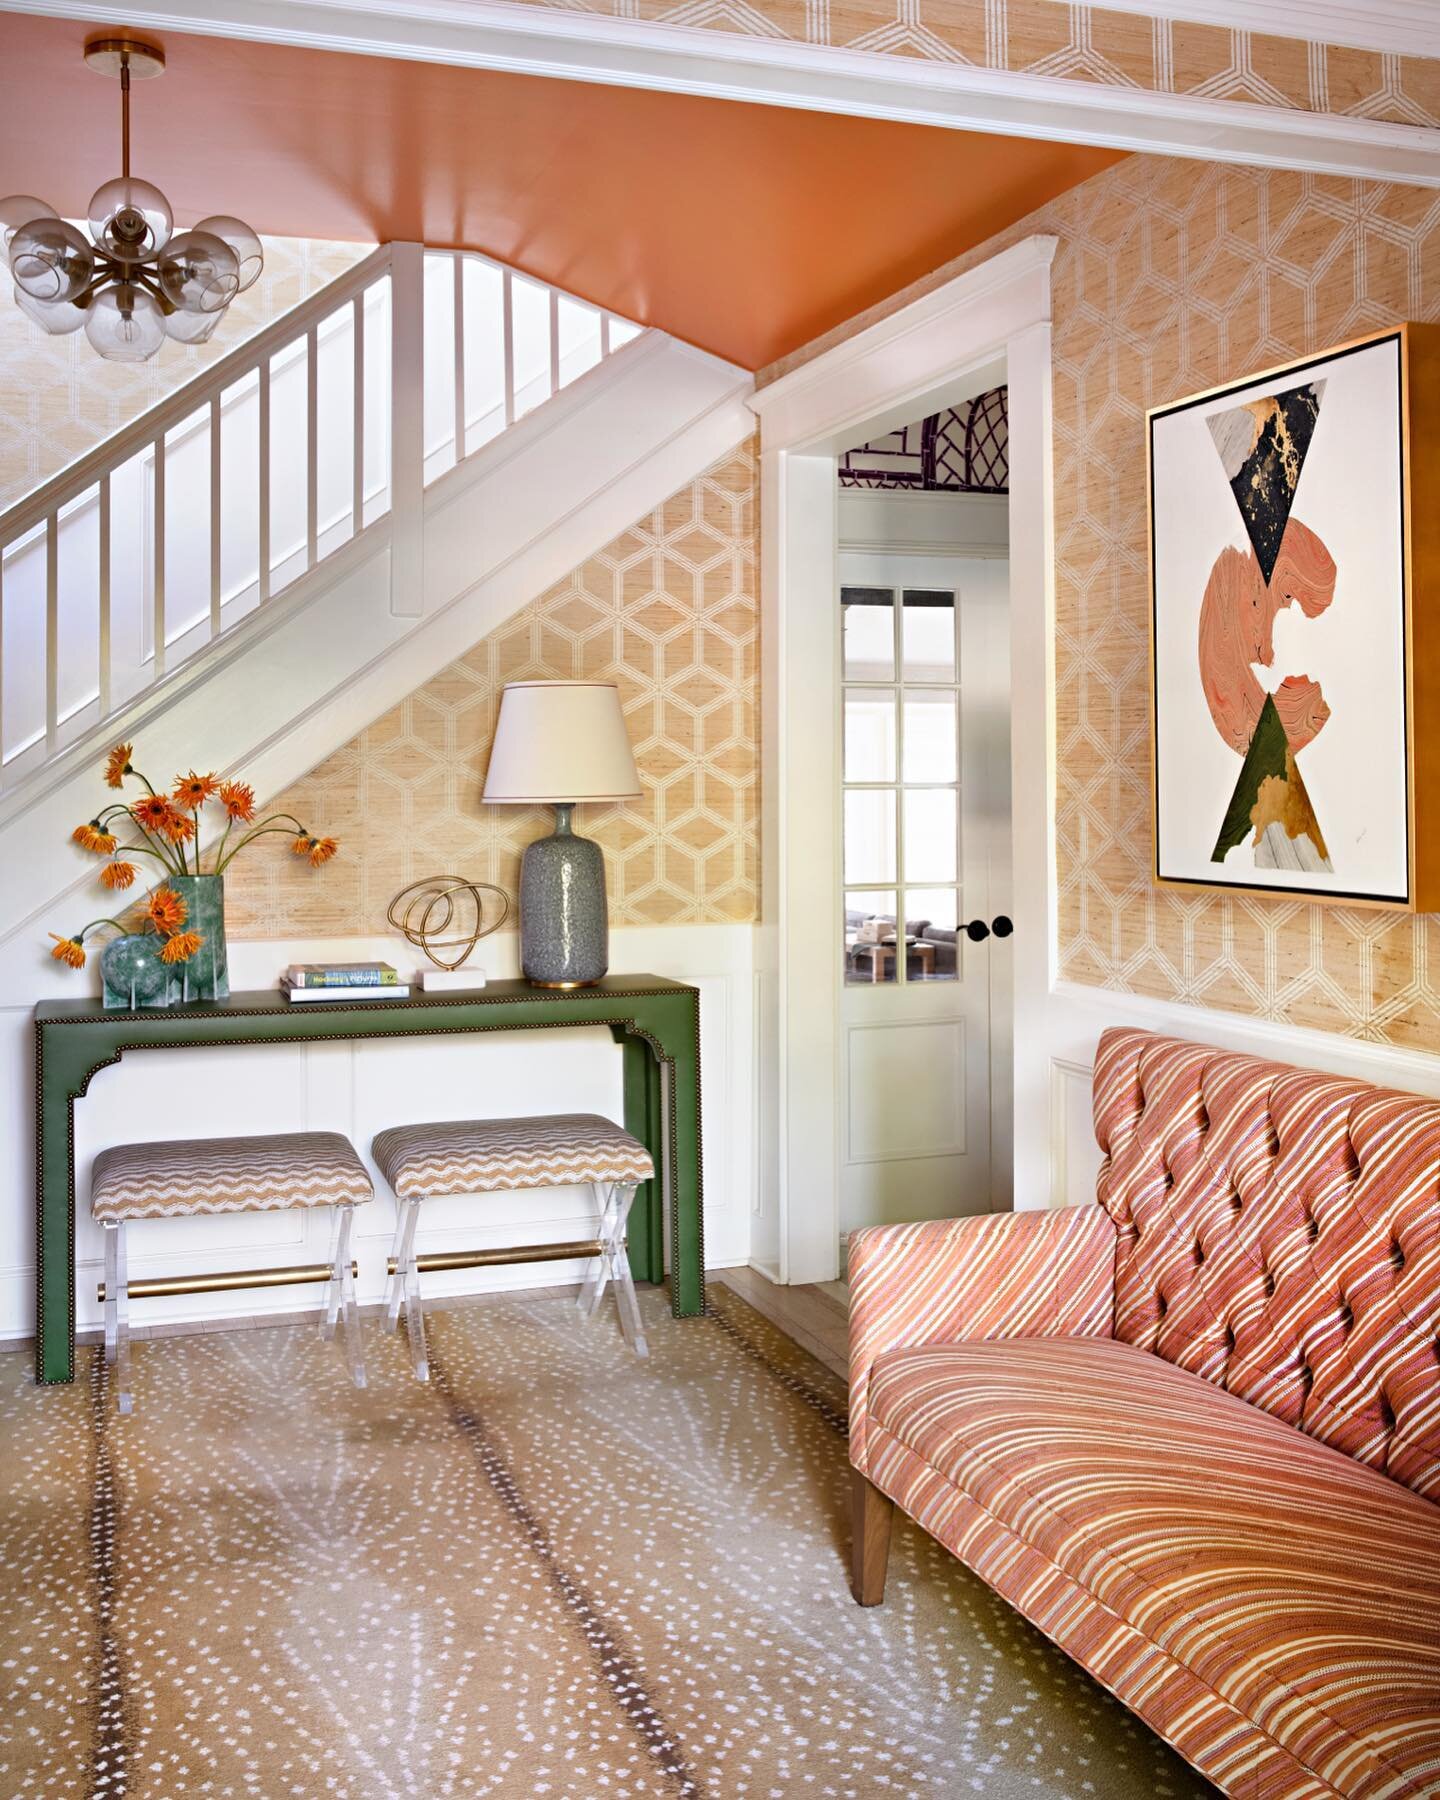 So thrilled to share our Pacific Palisades project featured in this month&rsquo;s @modernluxuryinteriors magazine - on newsstands now!  The ceiling was painted orange before we arrived on the project and the clients wanted to keep it so we designed t